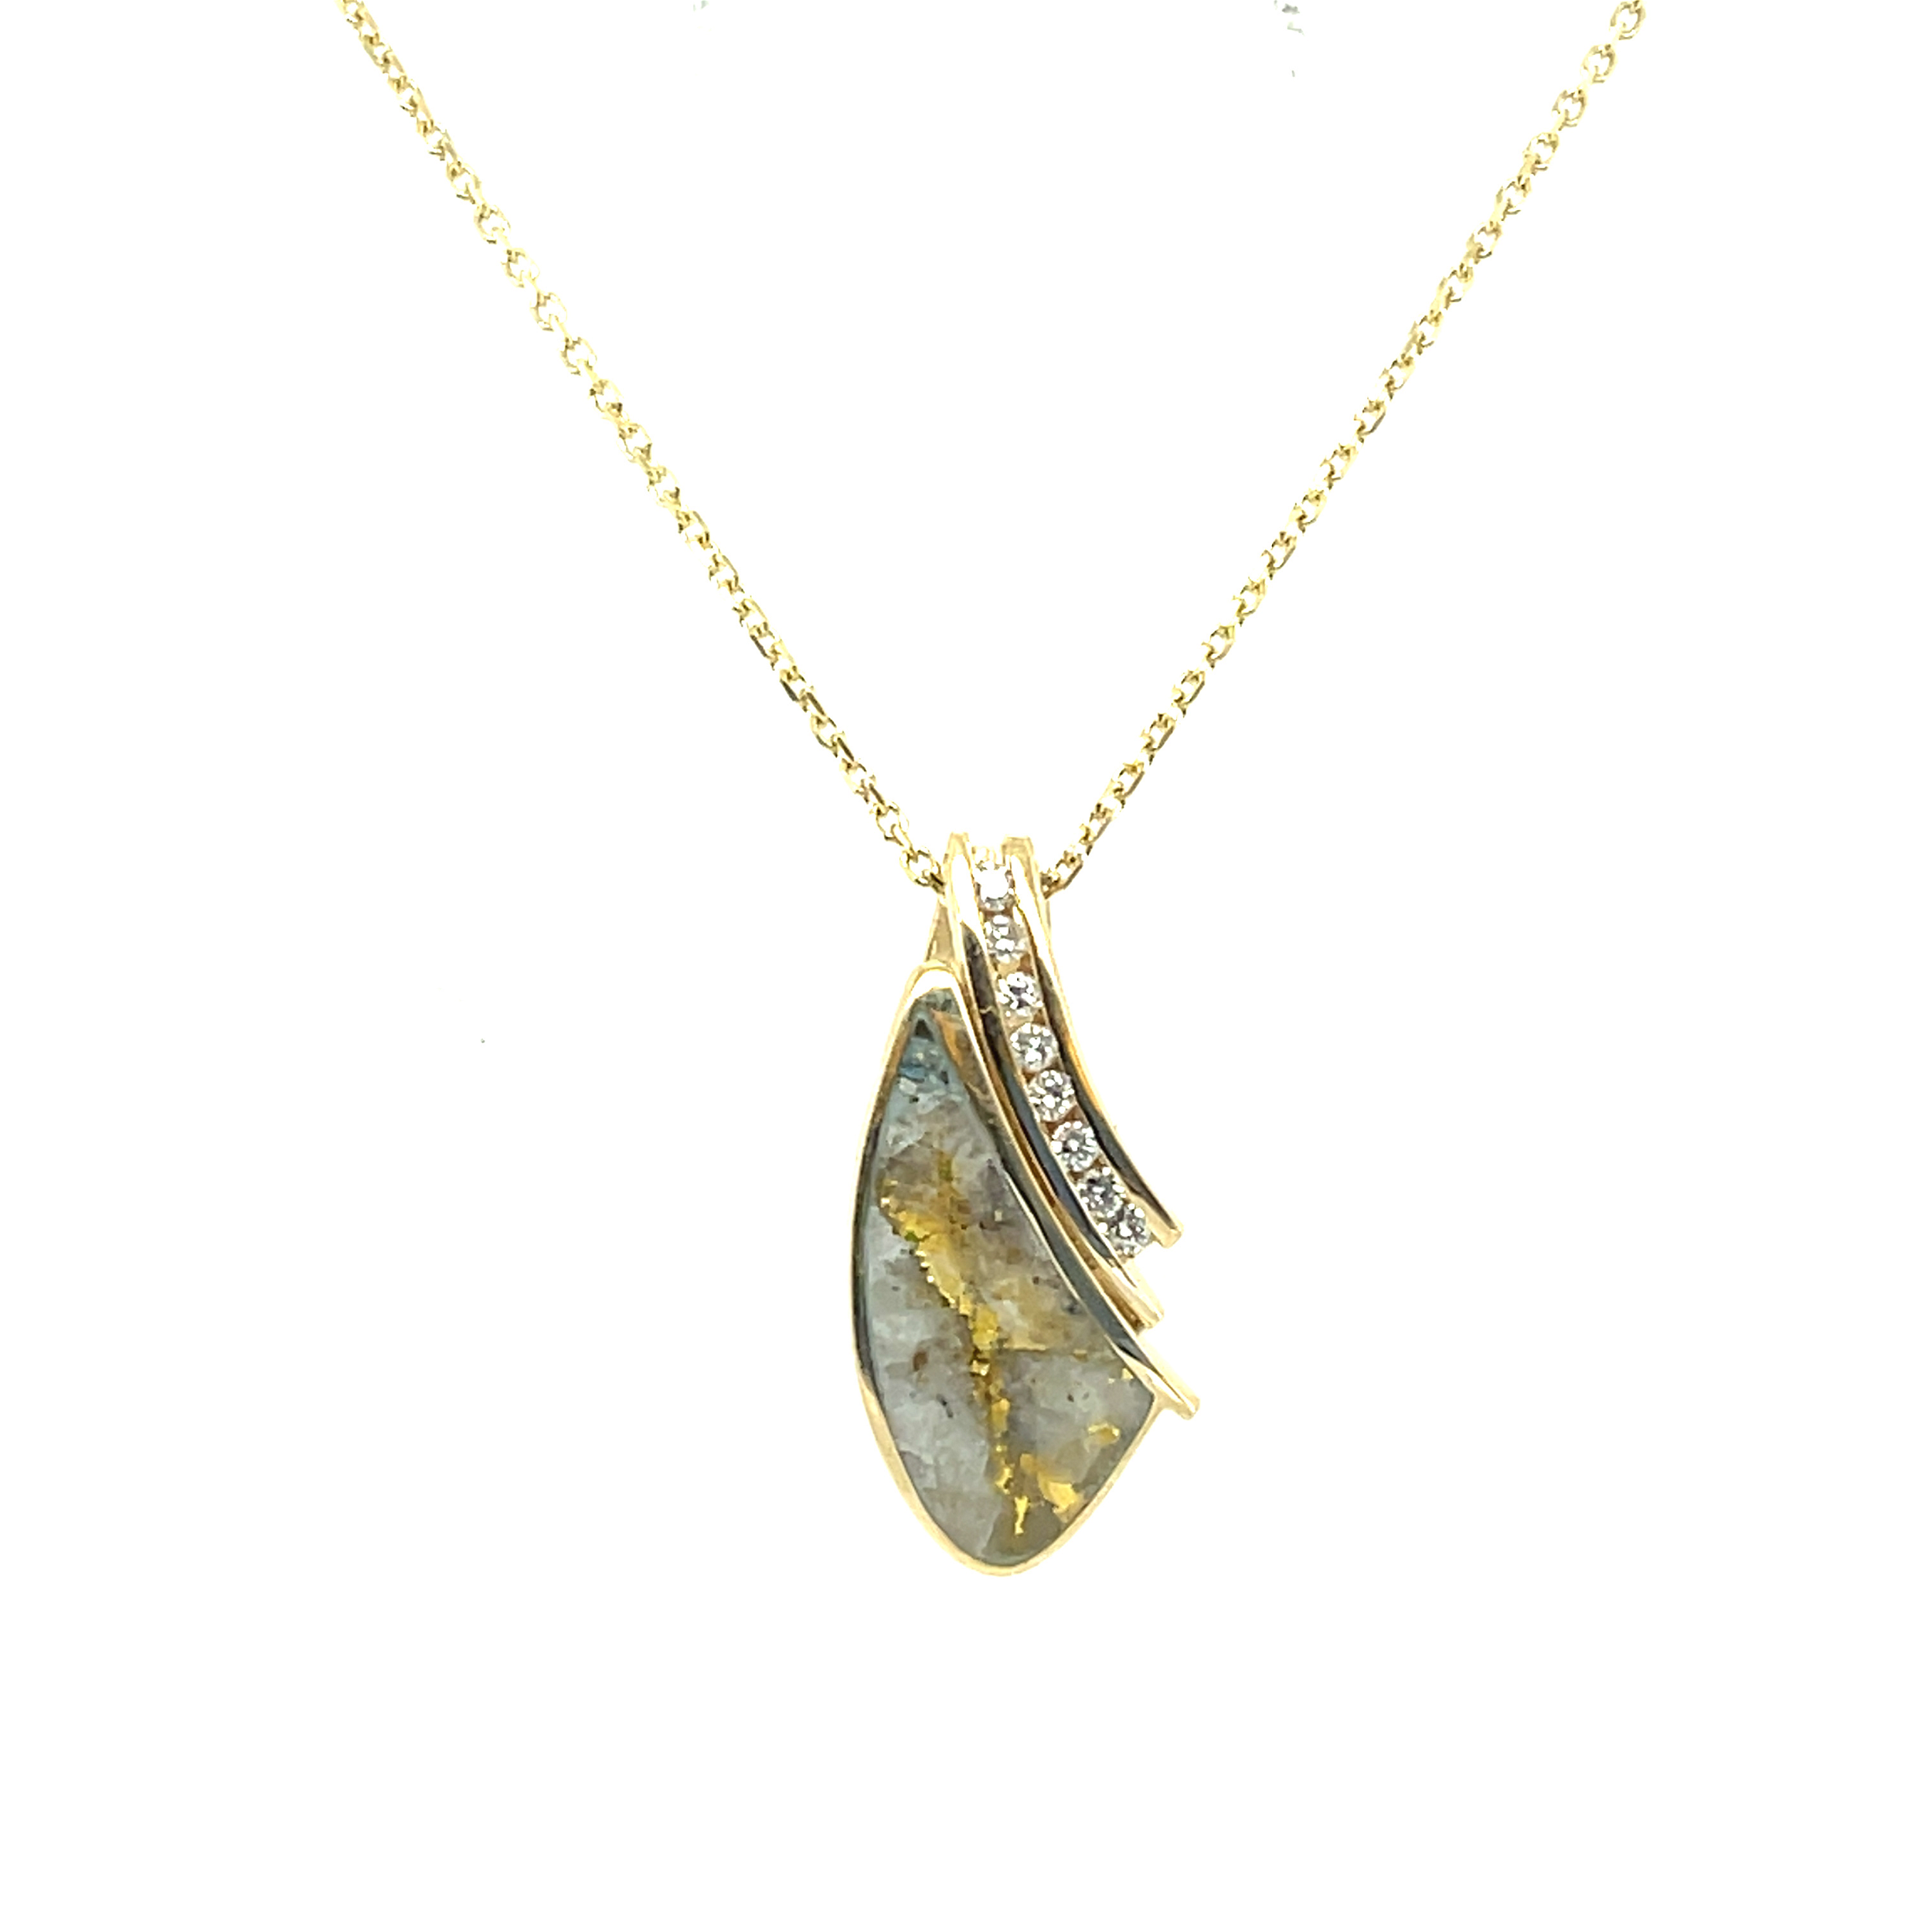 14k YG w/ Gold Quartz Inlay Necklace with Diamonds by Peter Fisher